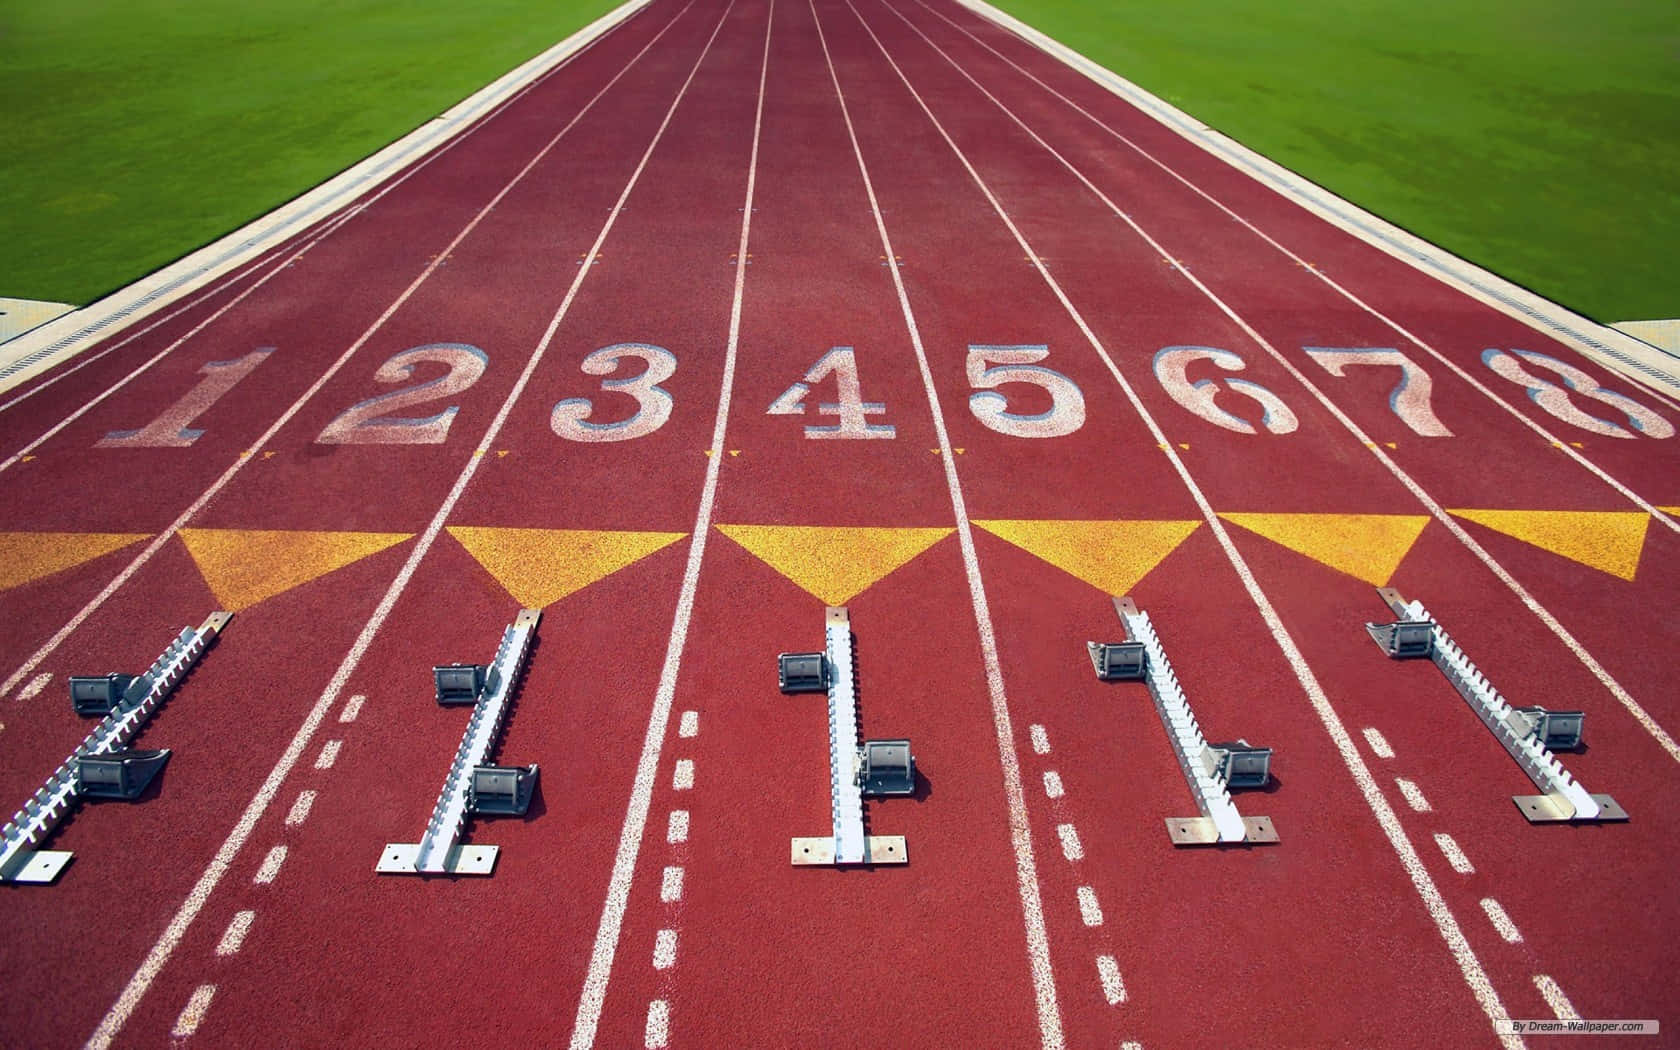 A Running Track With Numbers On It